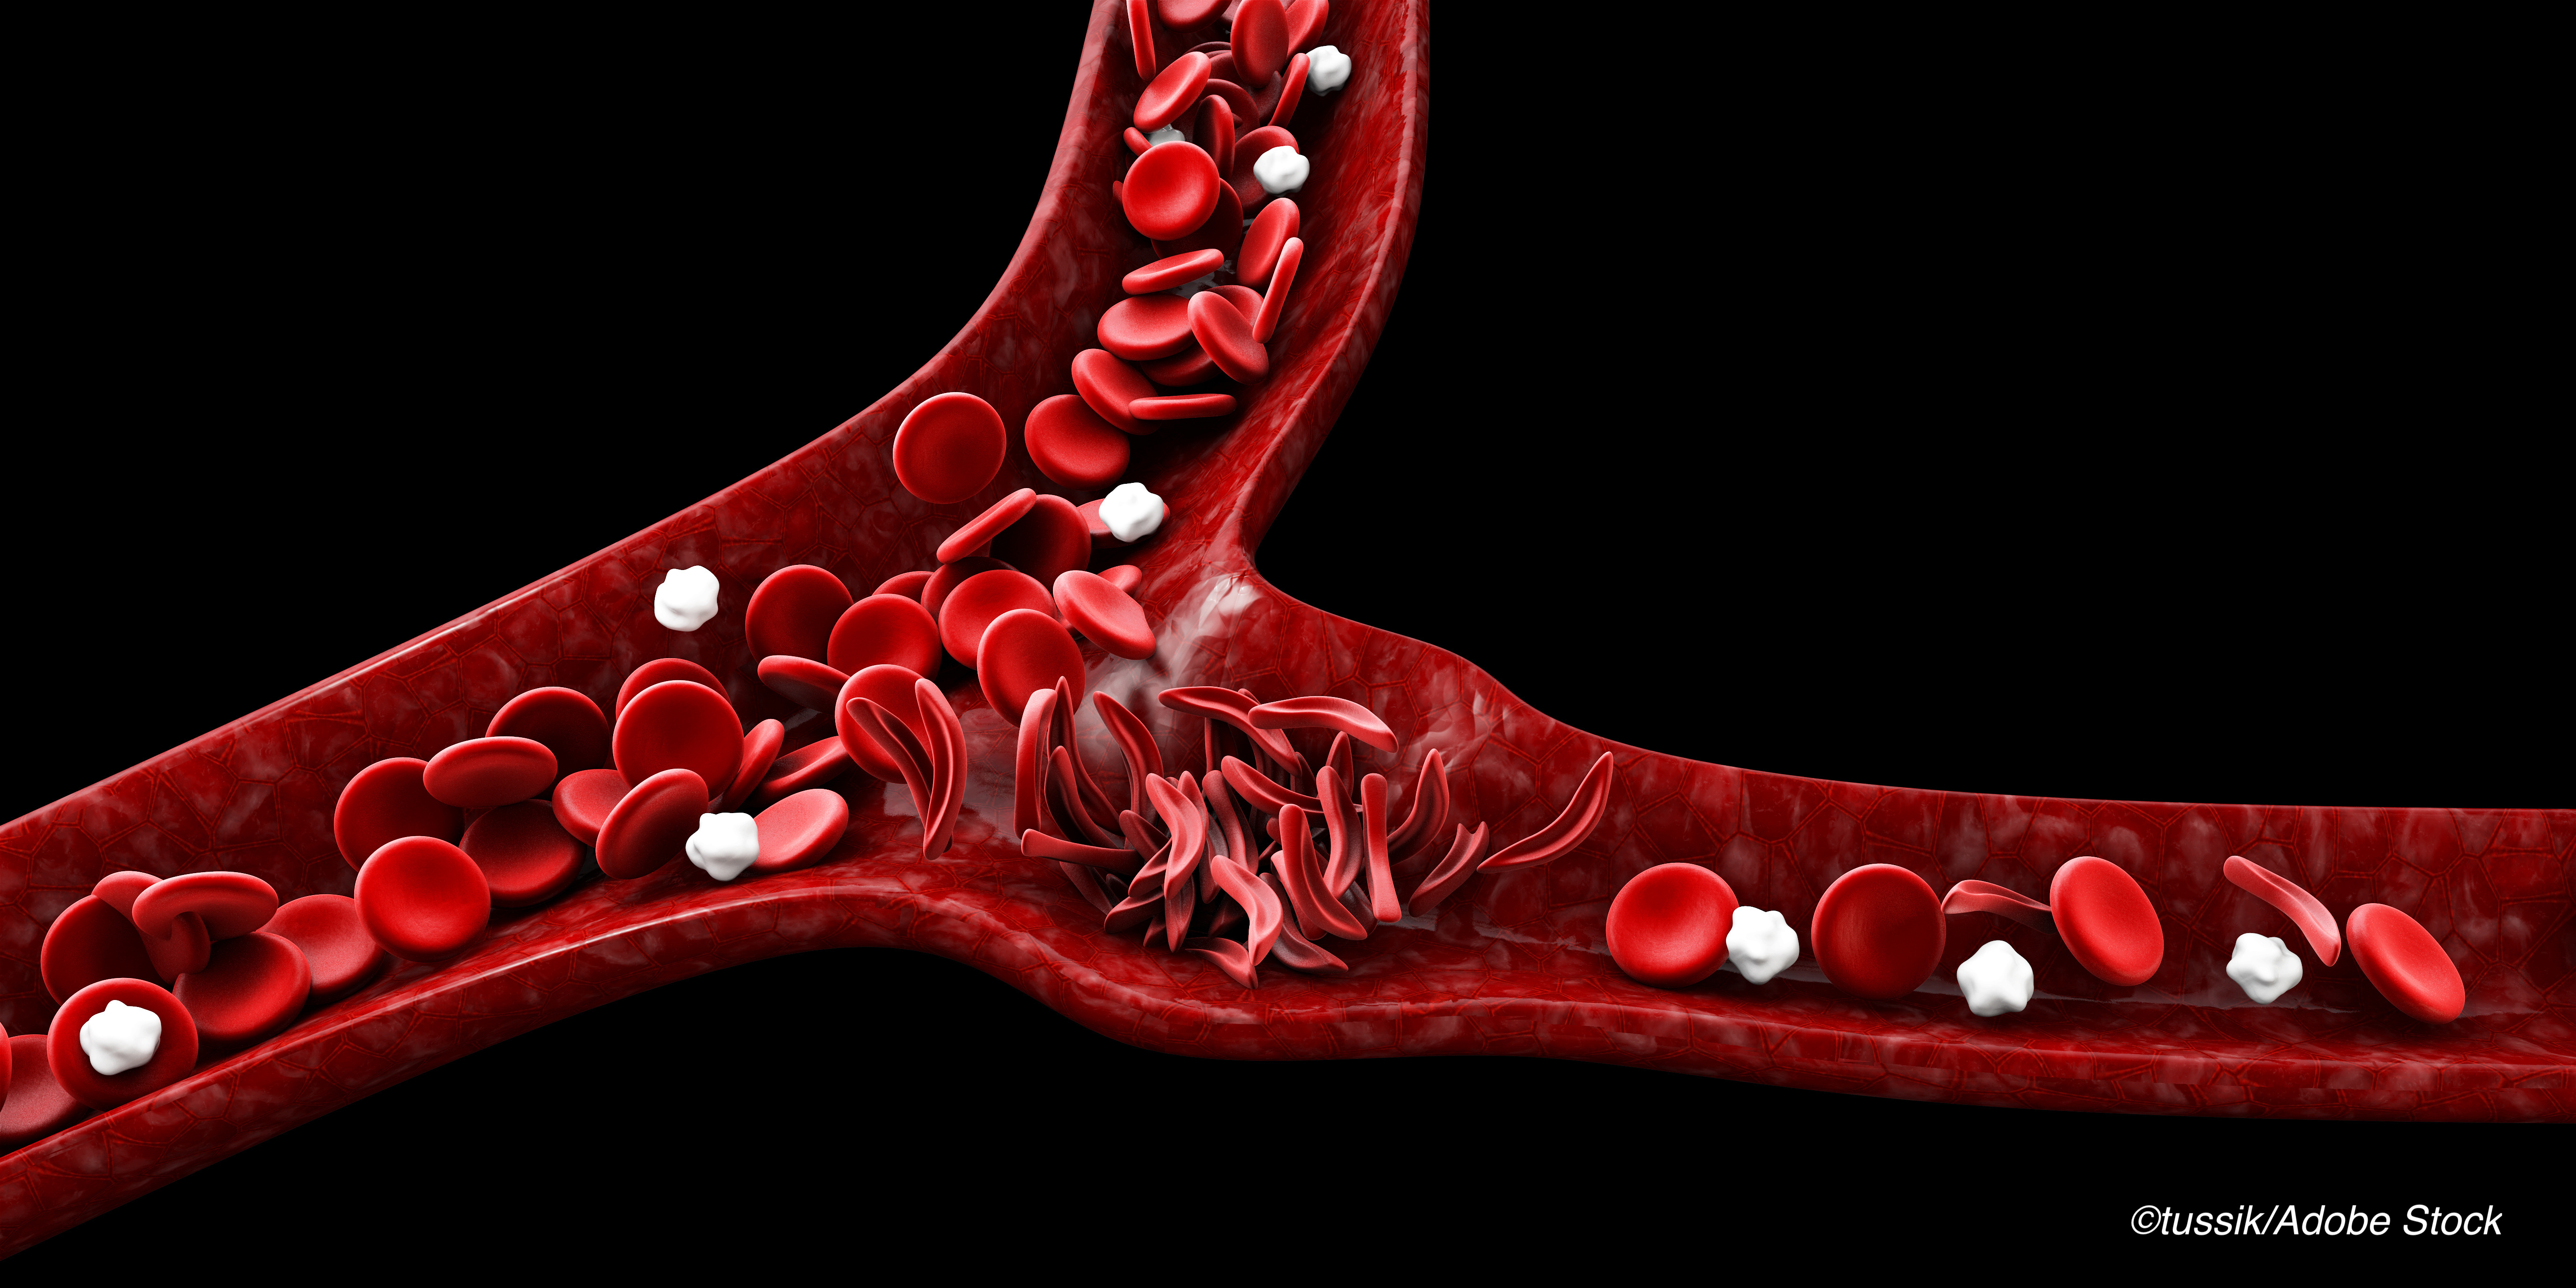 Microstructural Injury in Sickle Cell Disease May Show Stroke Vulnerability